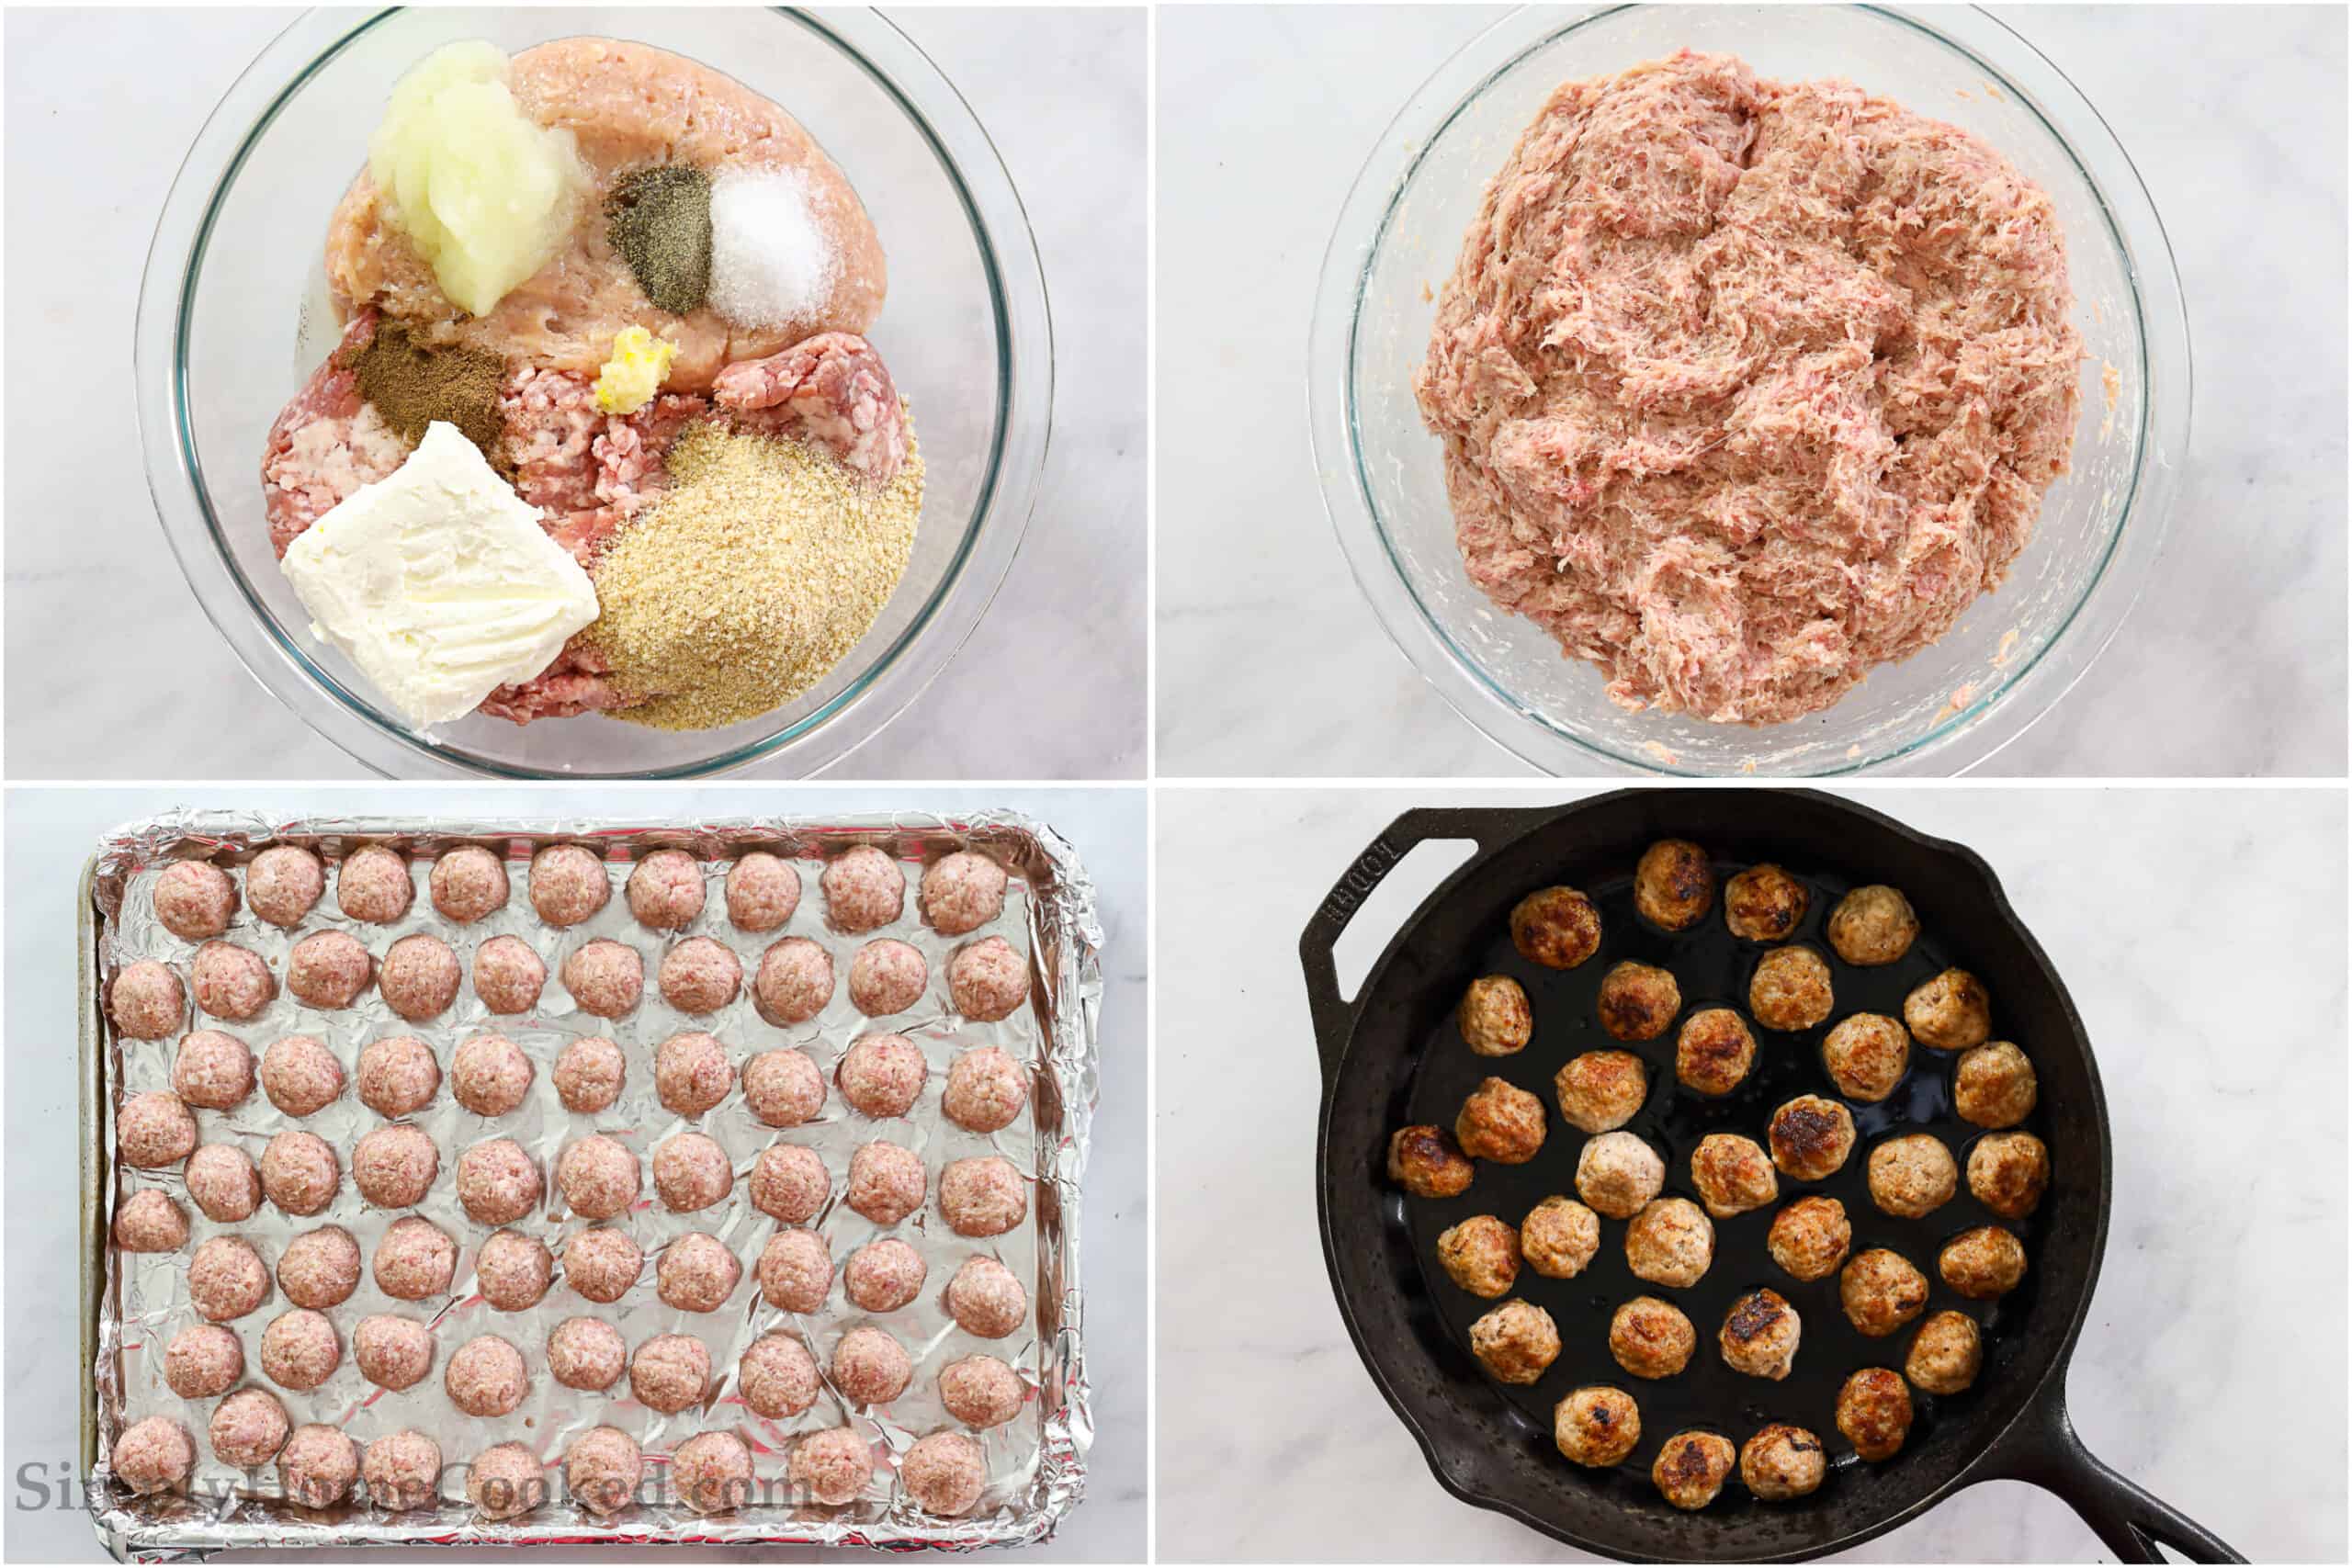 Steps to make Perfect Swedish Meatballs, including mixing the meatball ingredients together, then shaping it into balls, and cooking them in a cast-iron skillet.